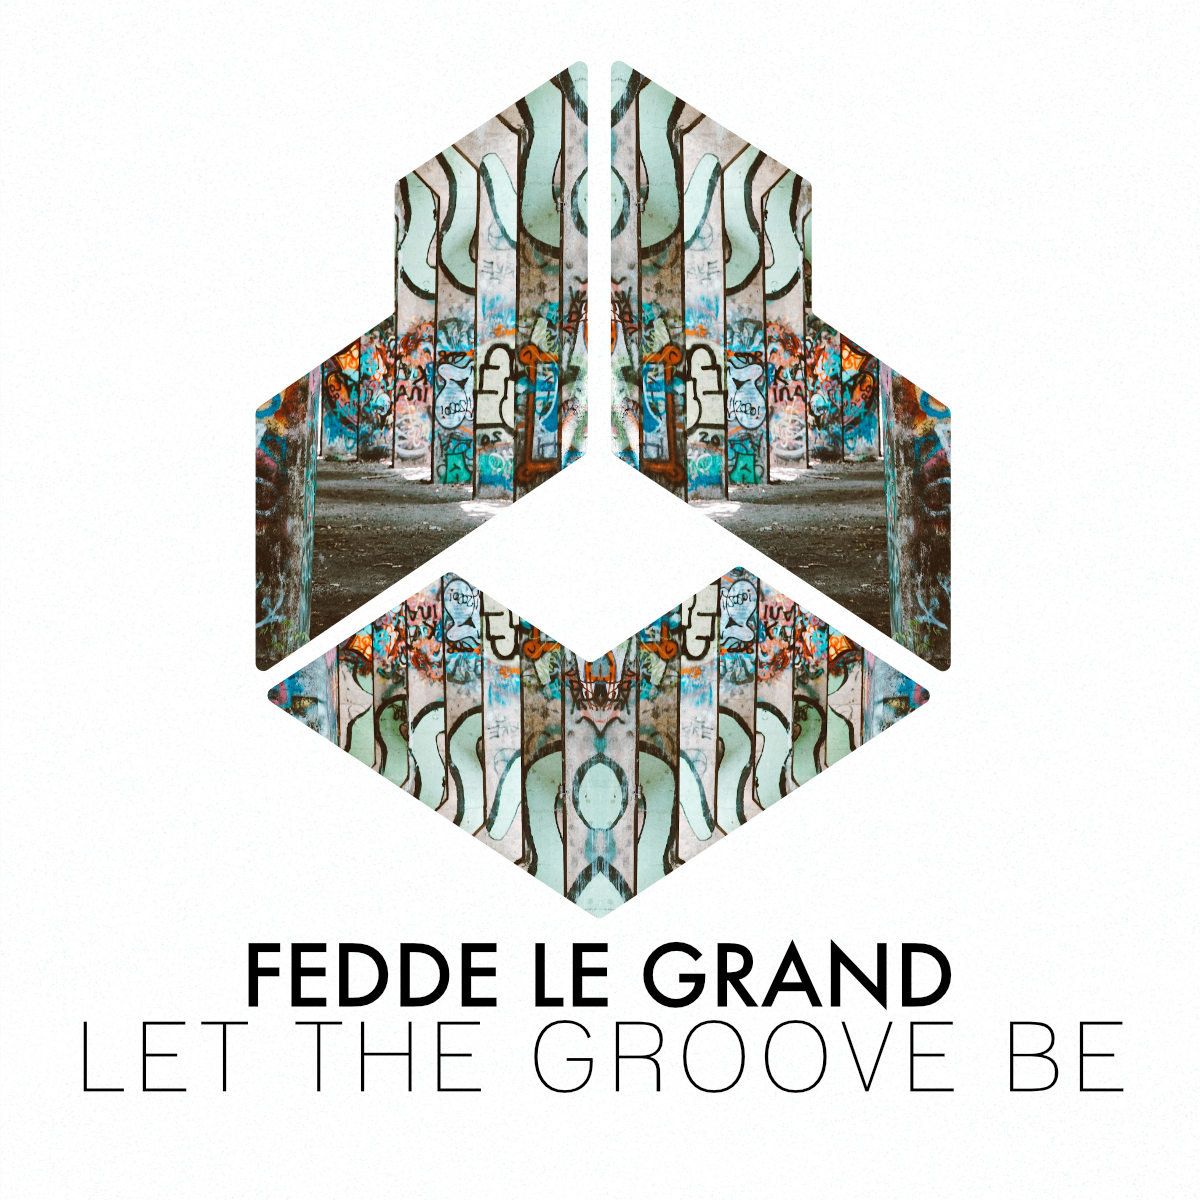 OUT NOW: Let The Groove Be